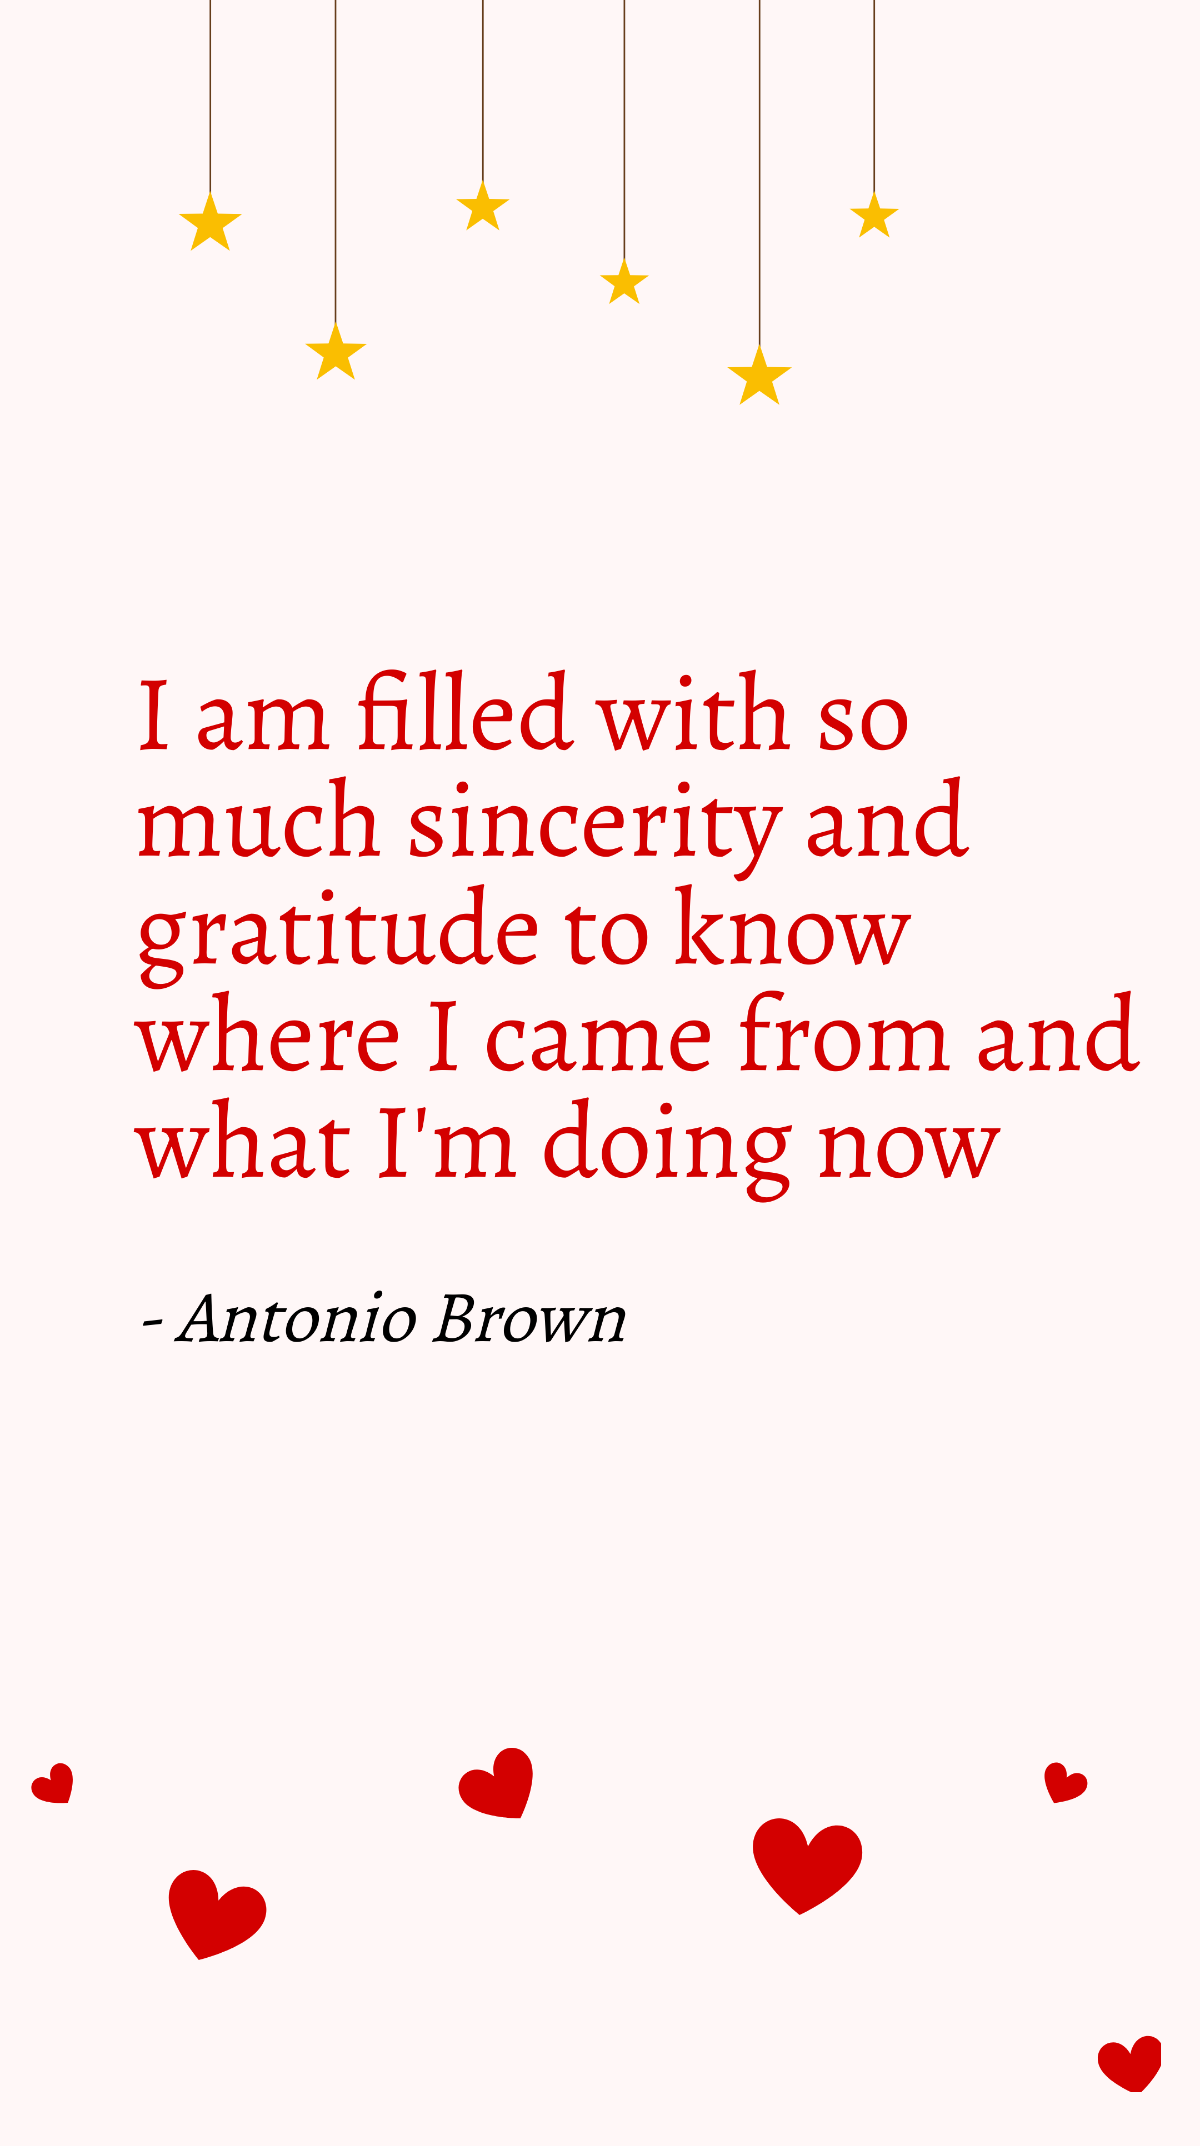 Antonio Brown- I am filled with so much sincerity and gratitude to know where I came from and what I'm doing now Template